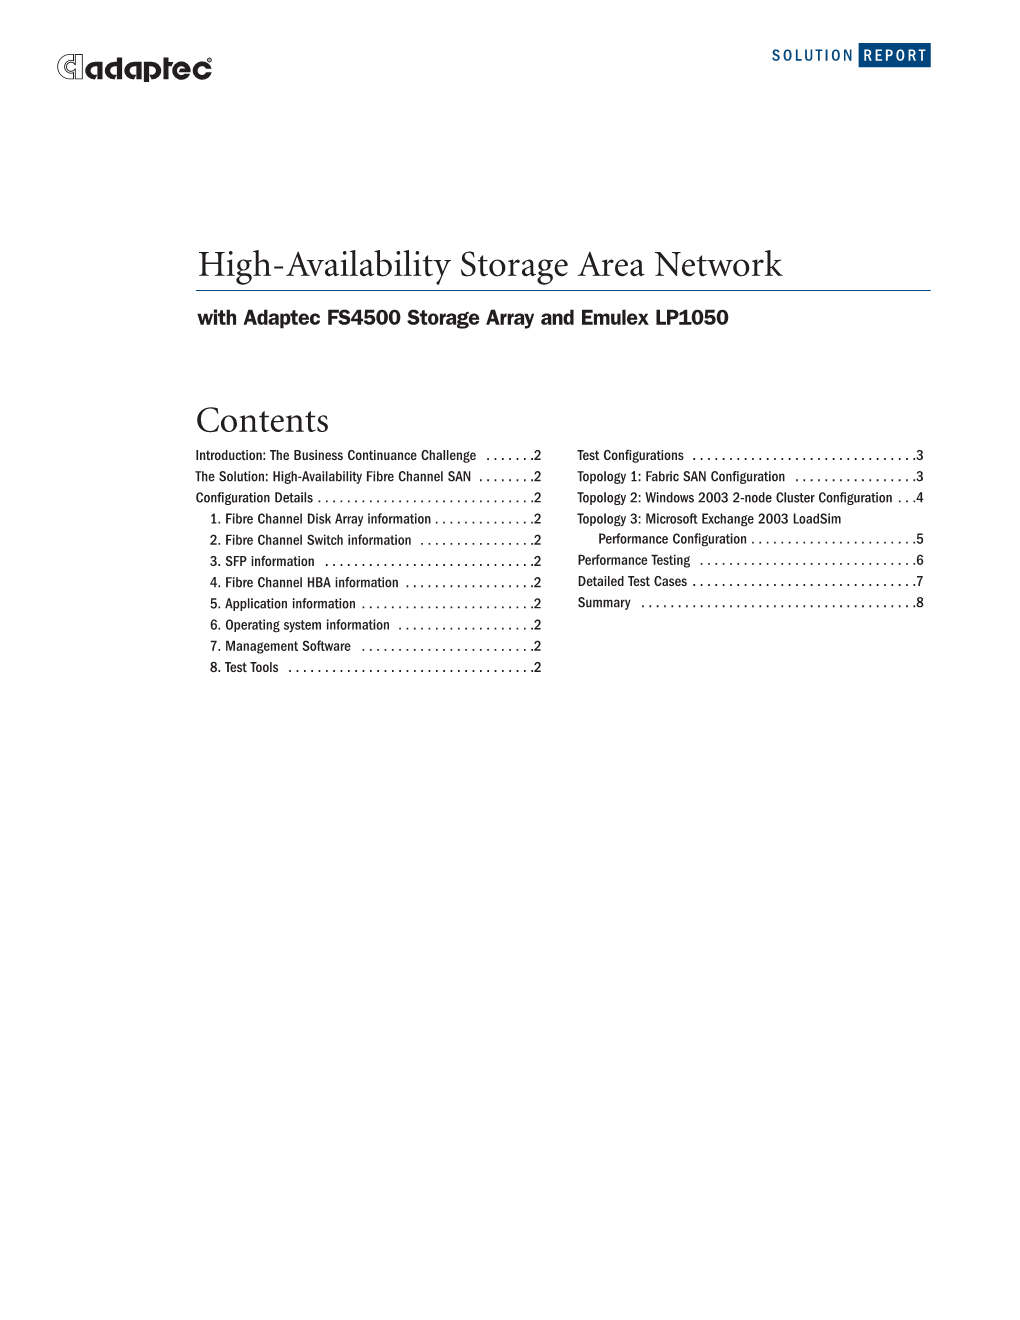 High-Availability Storage Area Network Contents